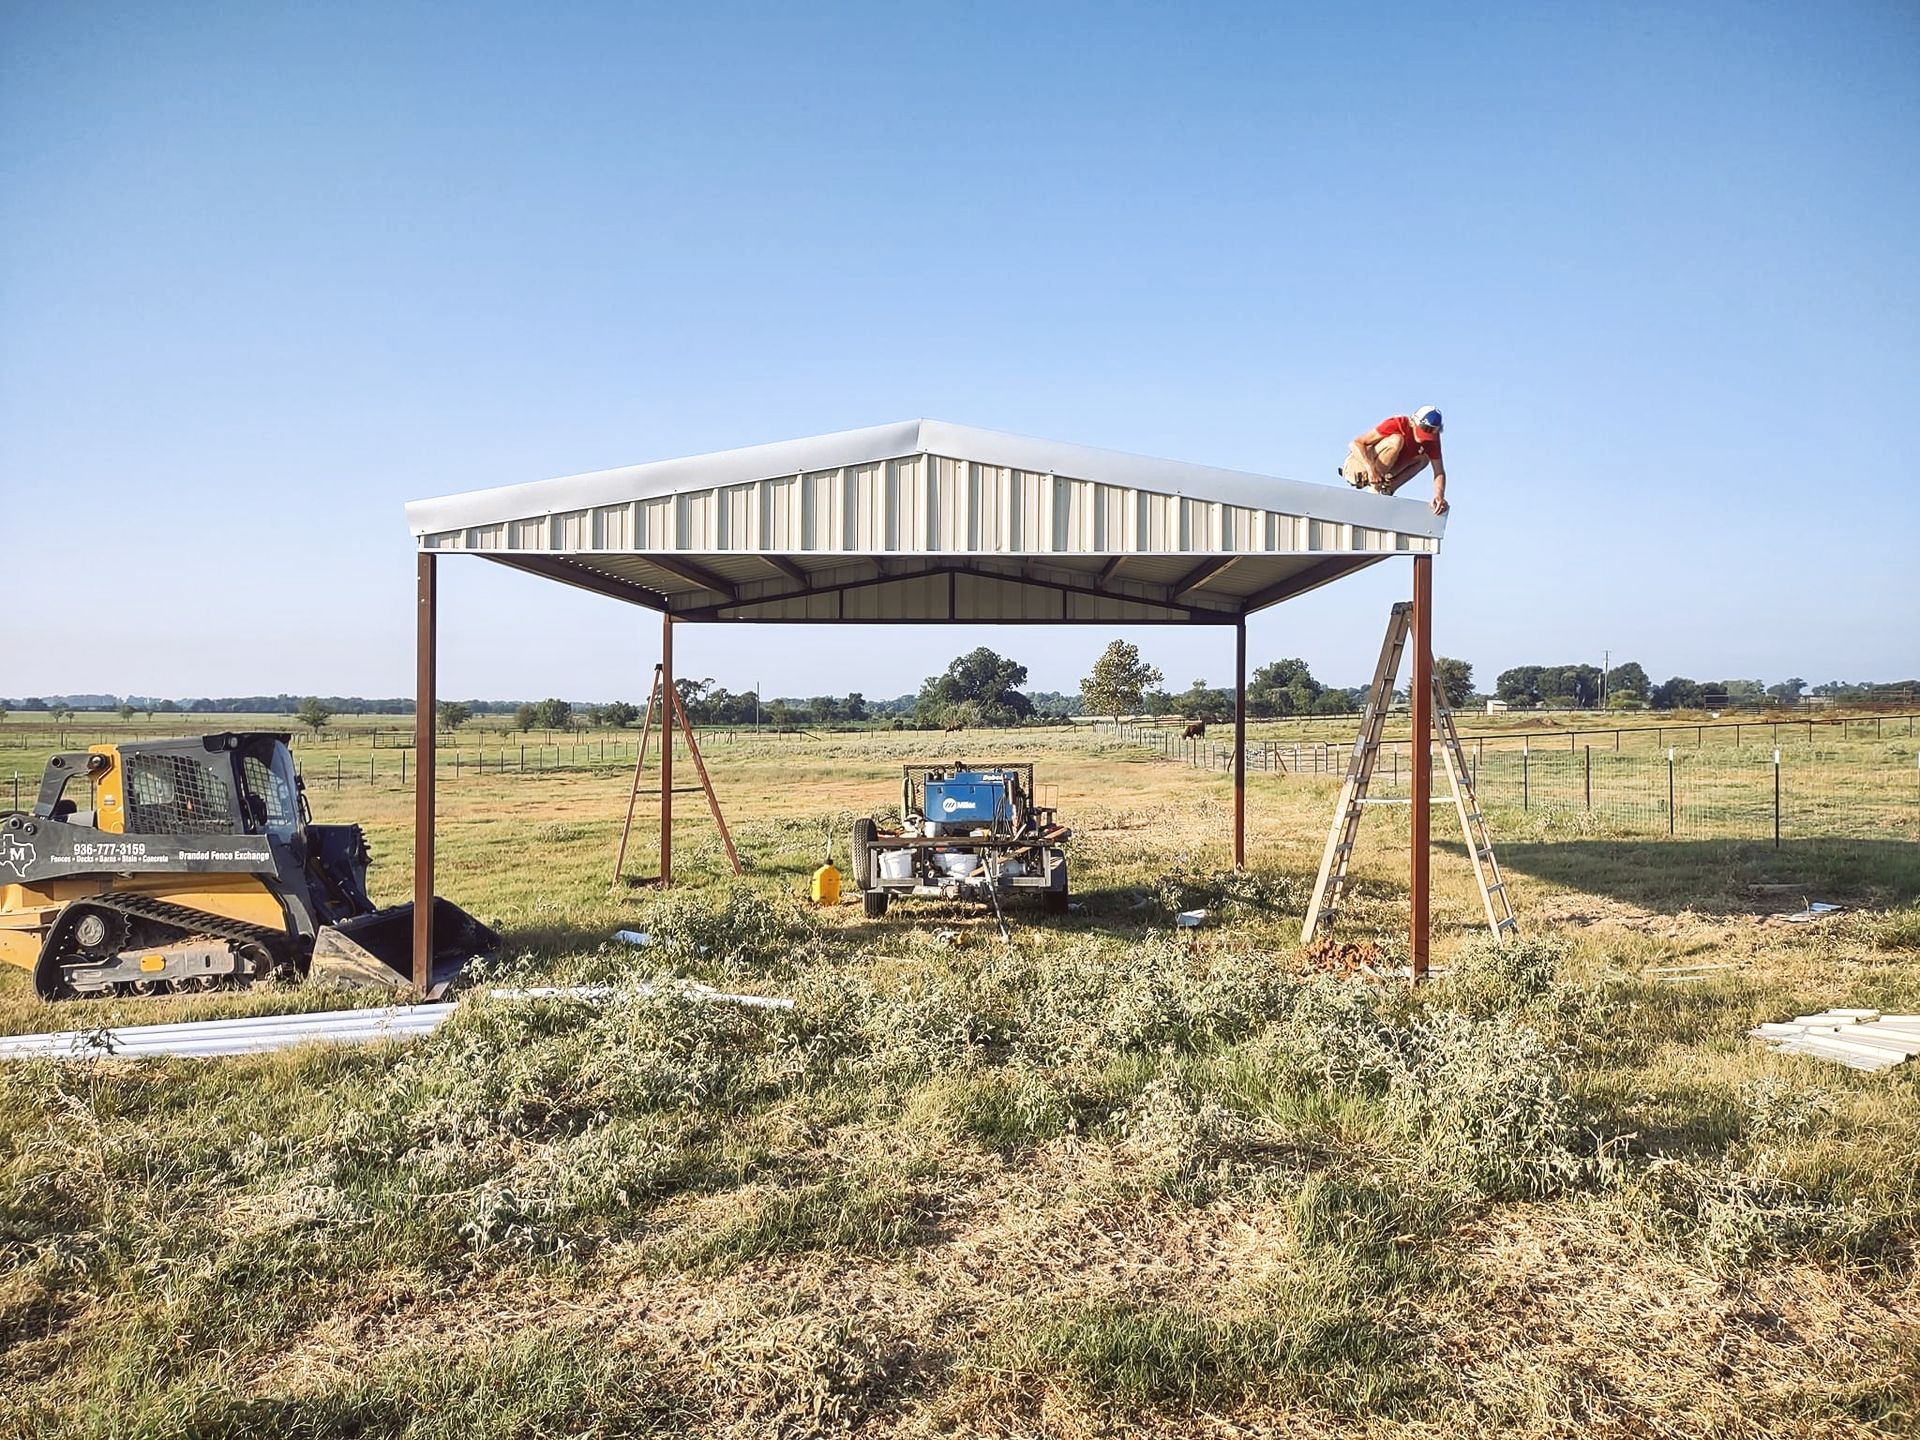 A man is working on a metal structure in a field.